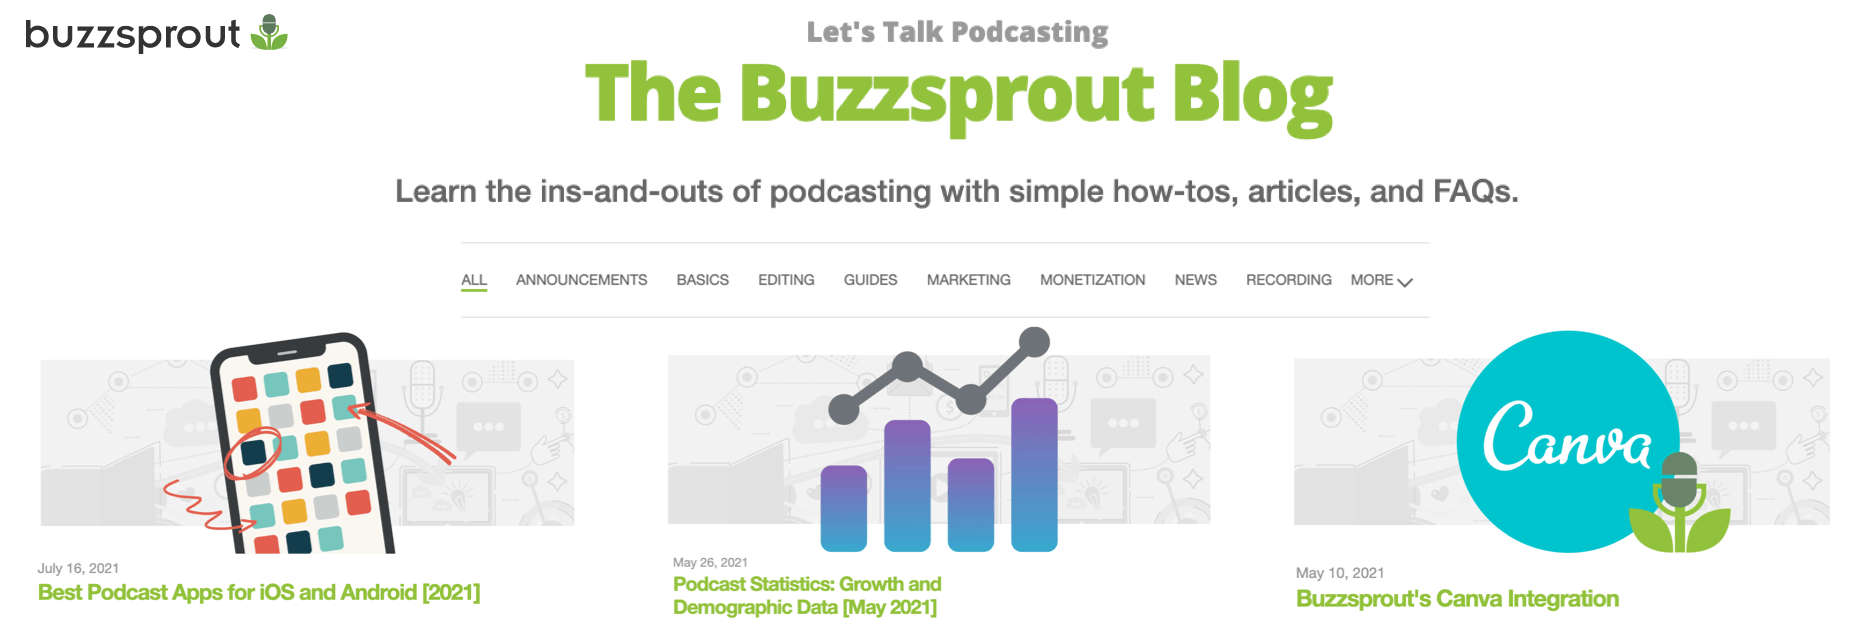 The Buzzsprout Blog homepage featuring three blog images 